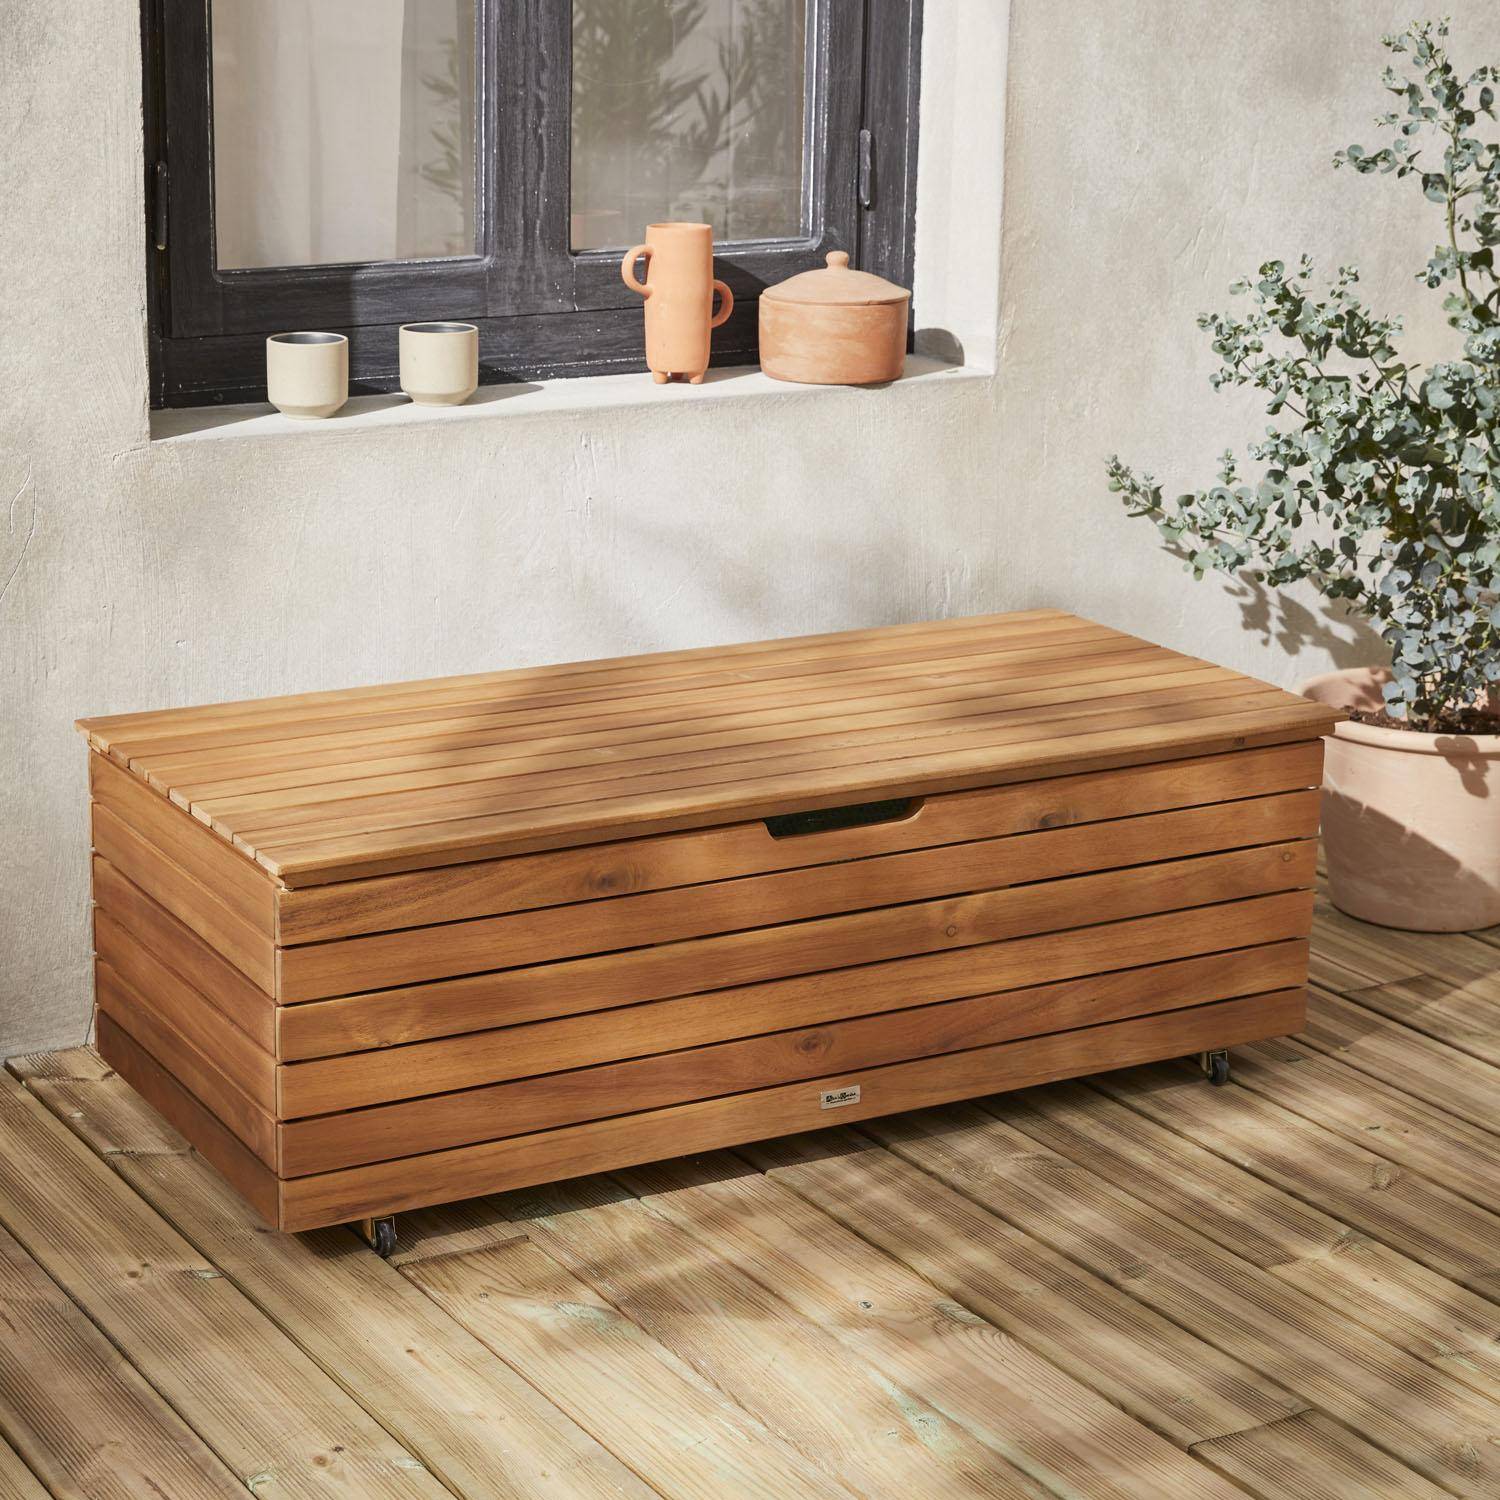 Garden storage box in wood - Saragosse - 110L, cushion storage, 107x48.5cm with hydraulic lift opening and casters,sweeek,Photo1